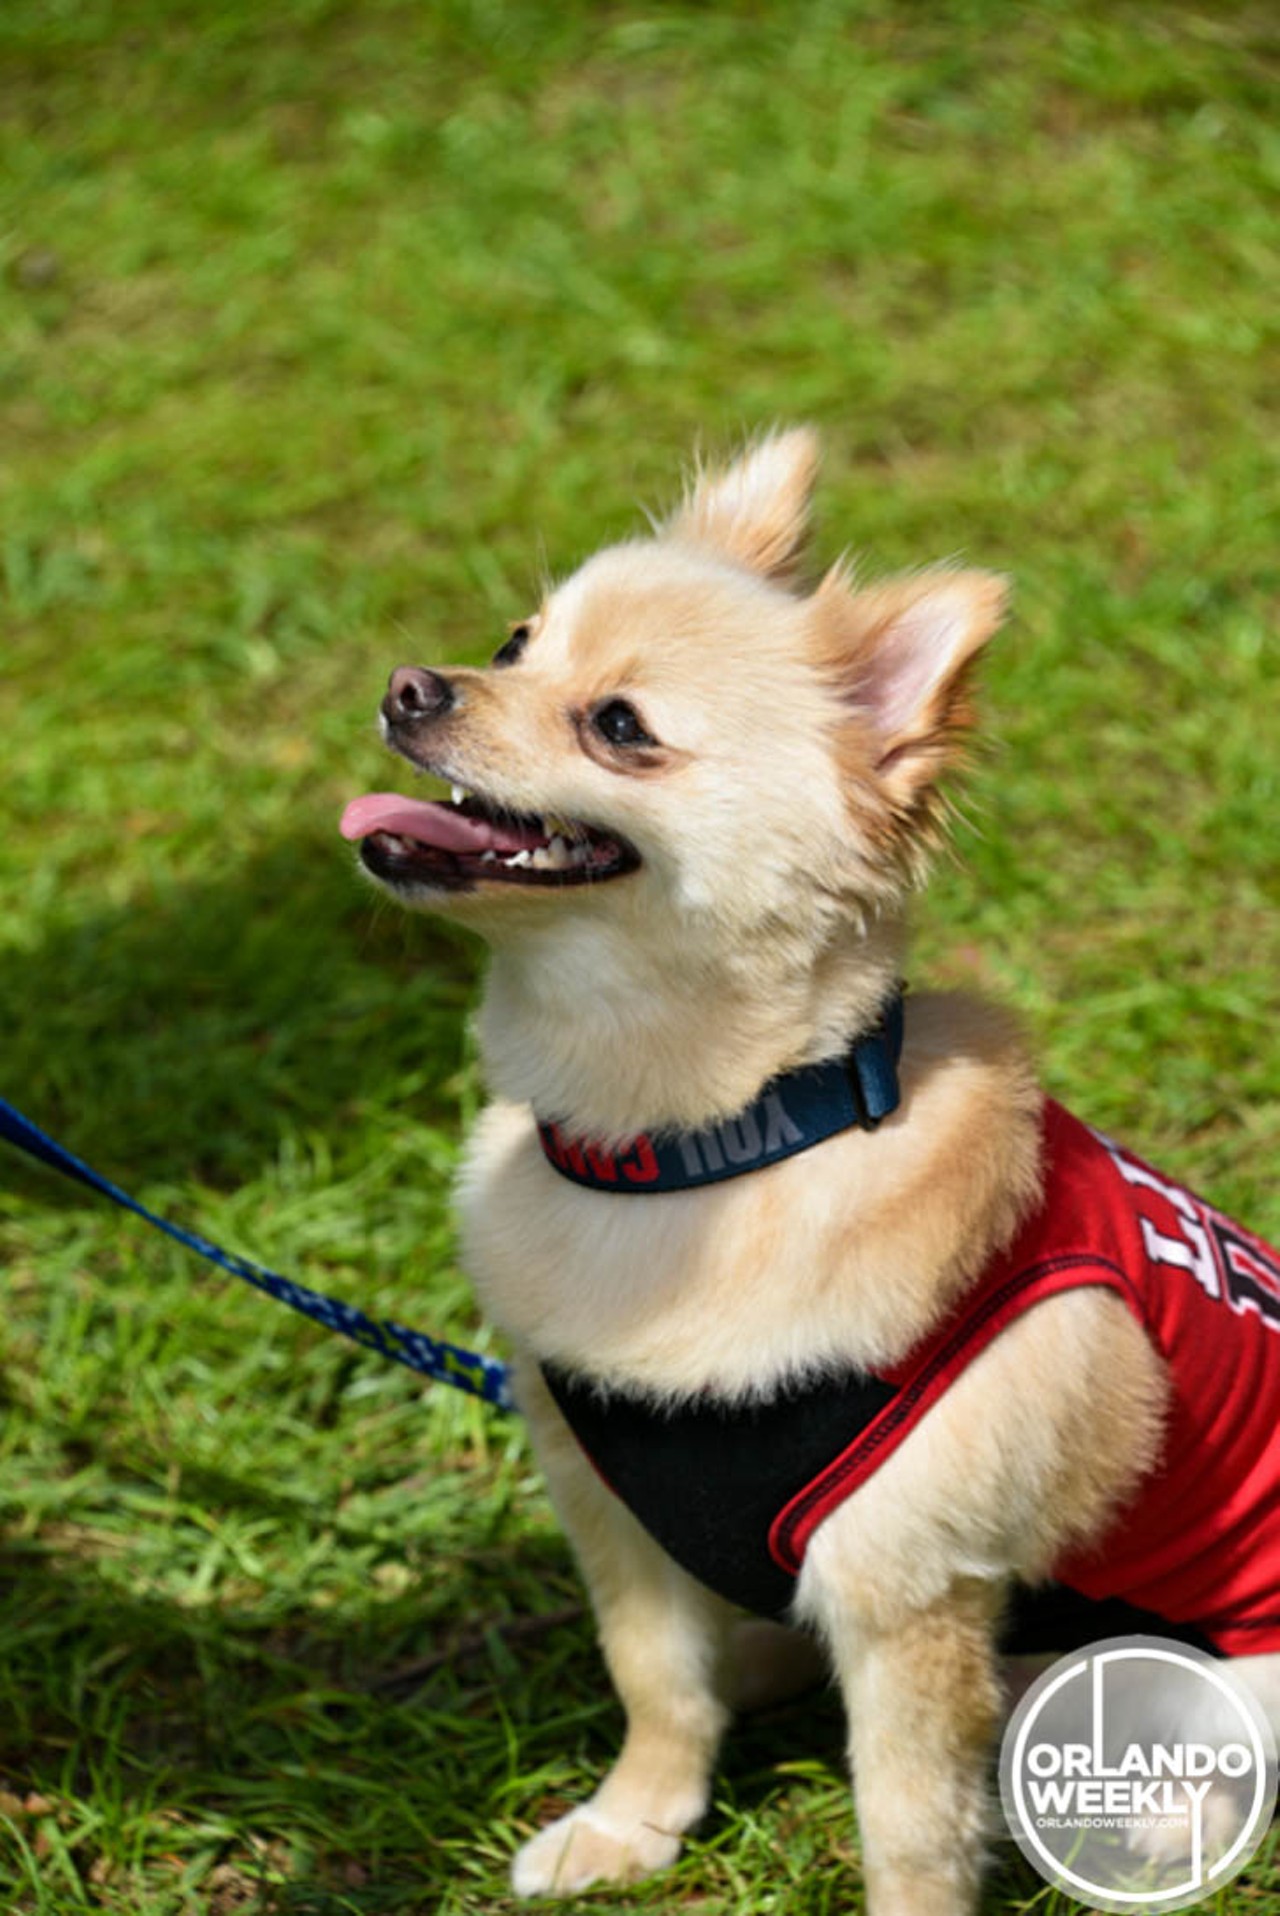 Adorable photos of our four-legged friends from Puppy Love Dog Festival 2016